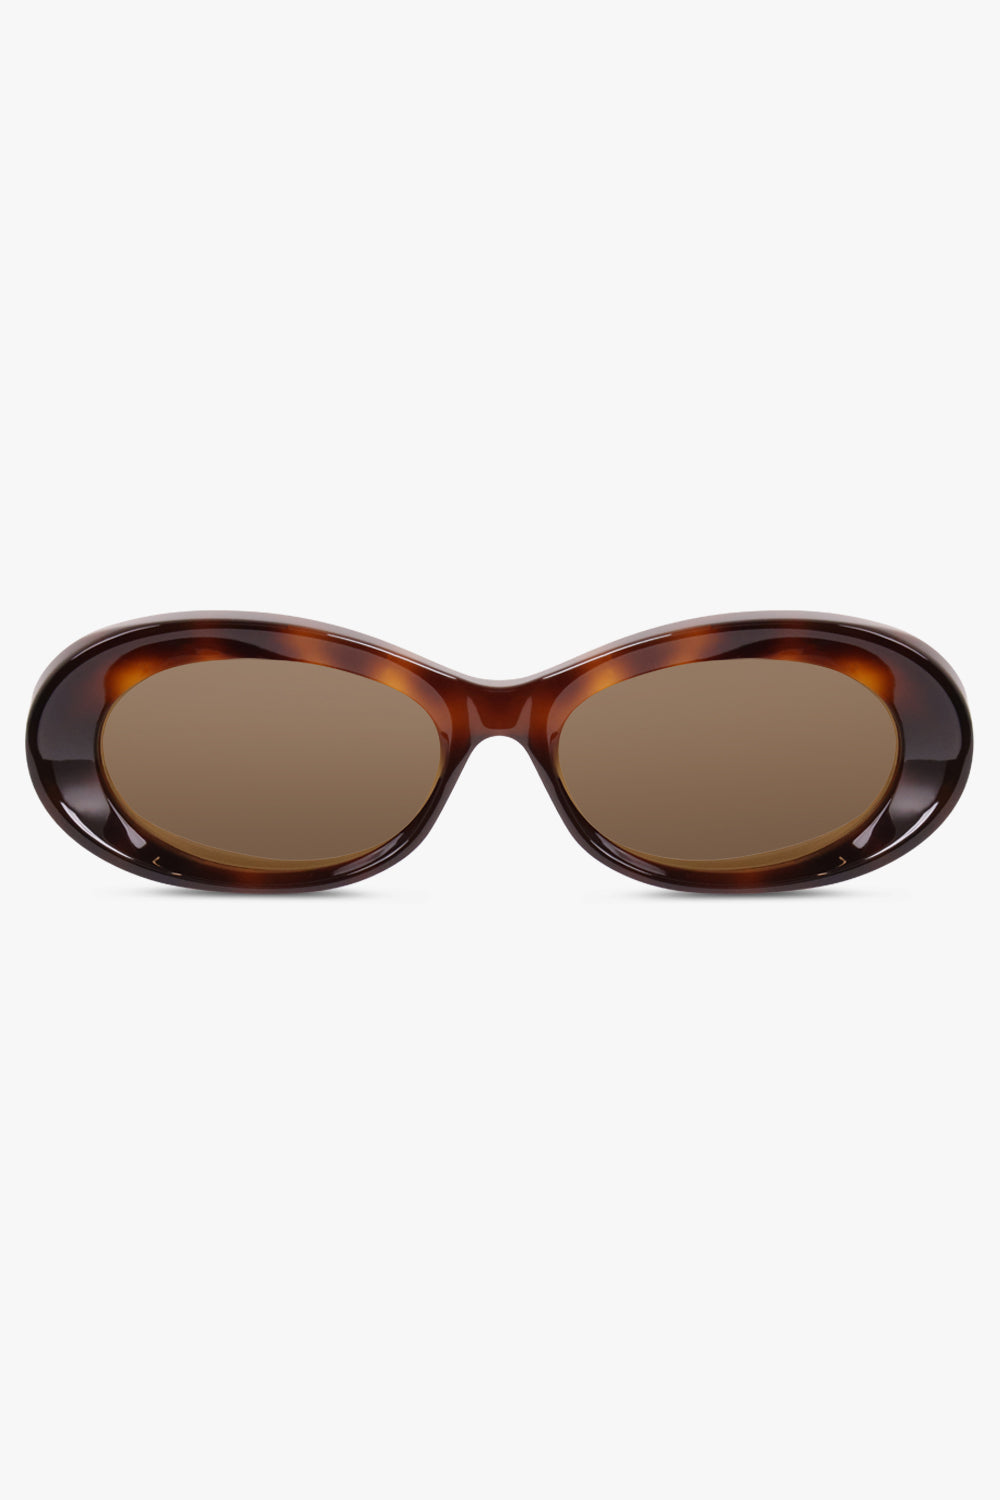 GUCCI ACCESSORIES BROWN / BROWN GG1527S 54 Oval Frame Sunglasses | Havana